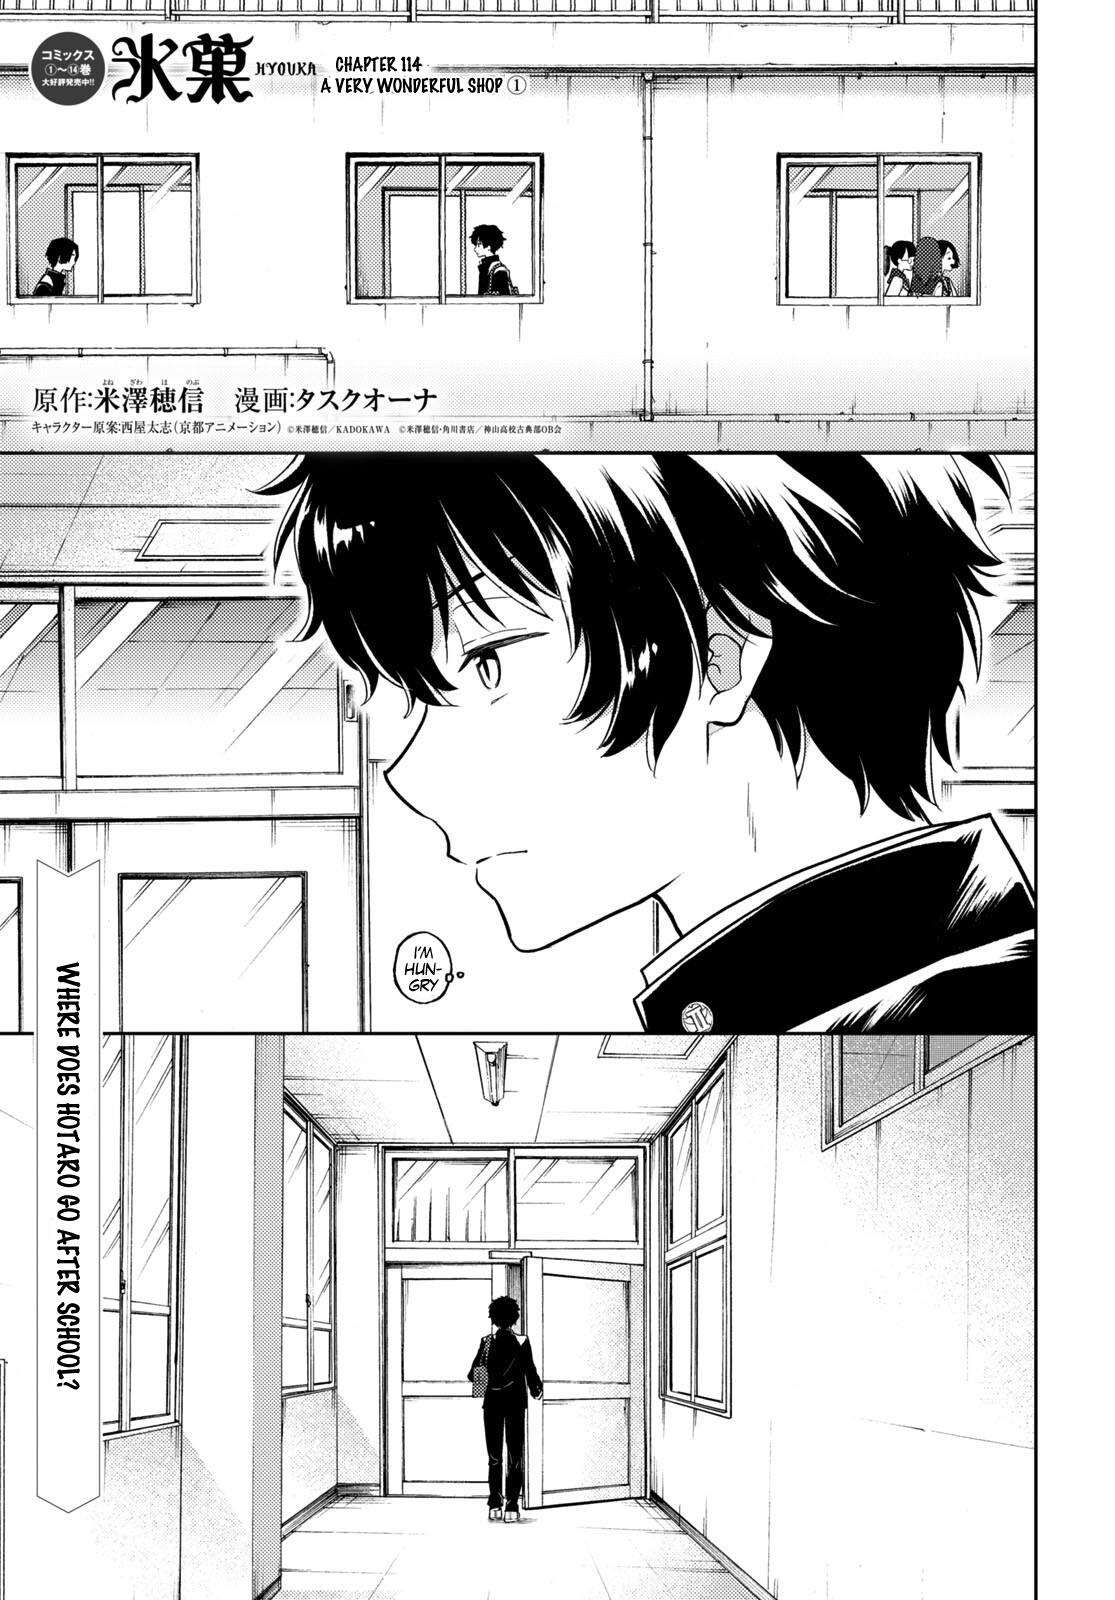 Hyouka Chapter 114: A Very Wonderful Shop - Picture 1